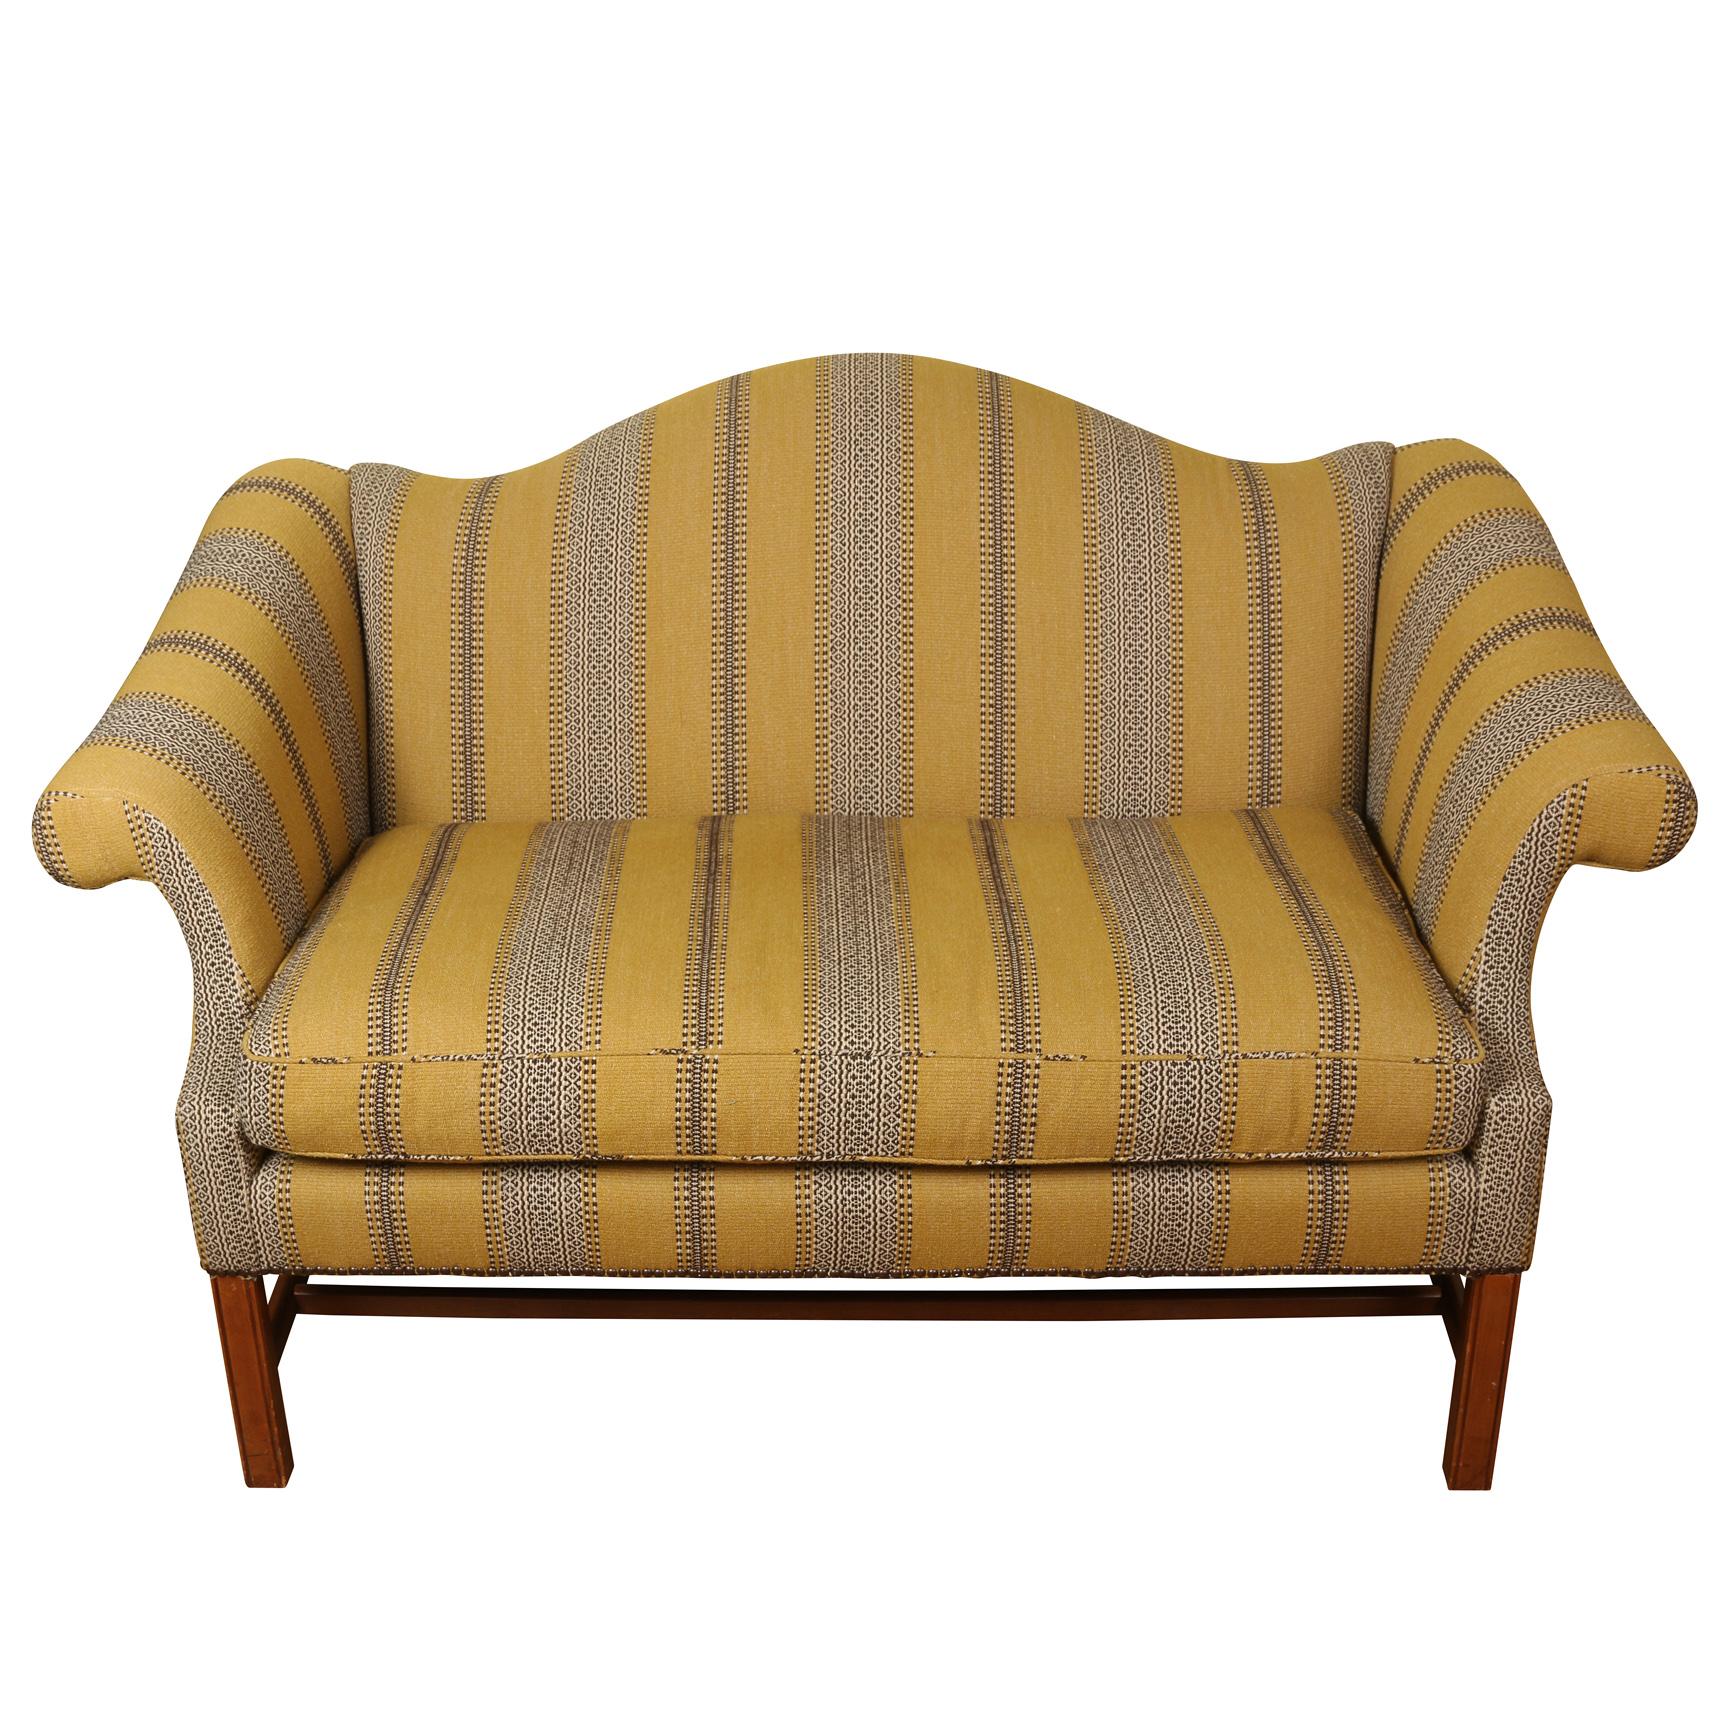 A  handsome Georgian style camelback settee with a flat back, loose seat cushion and rolled arms, on squared mahogany legs.  The upholstery, a woven stripe, is in excellent condition.